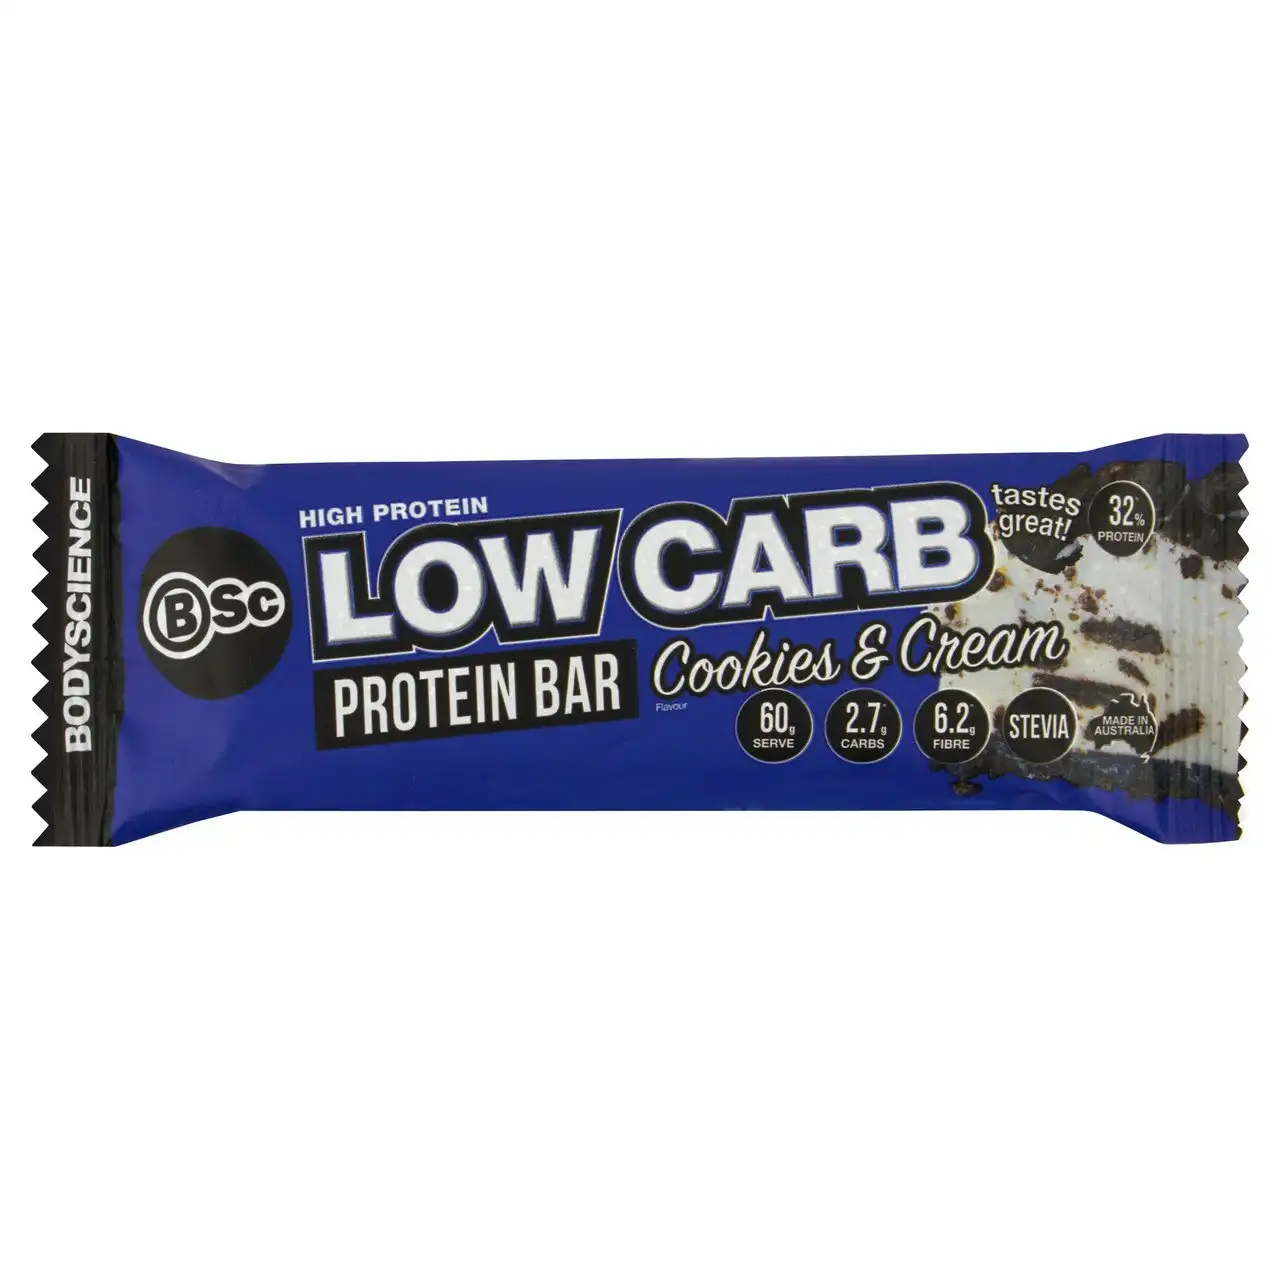 BSc Low Carb Cookies & Cream High Protein Bar 60g